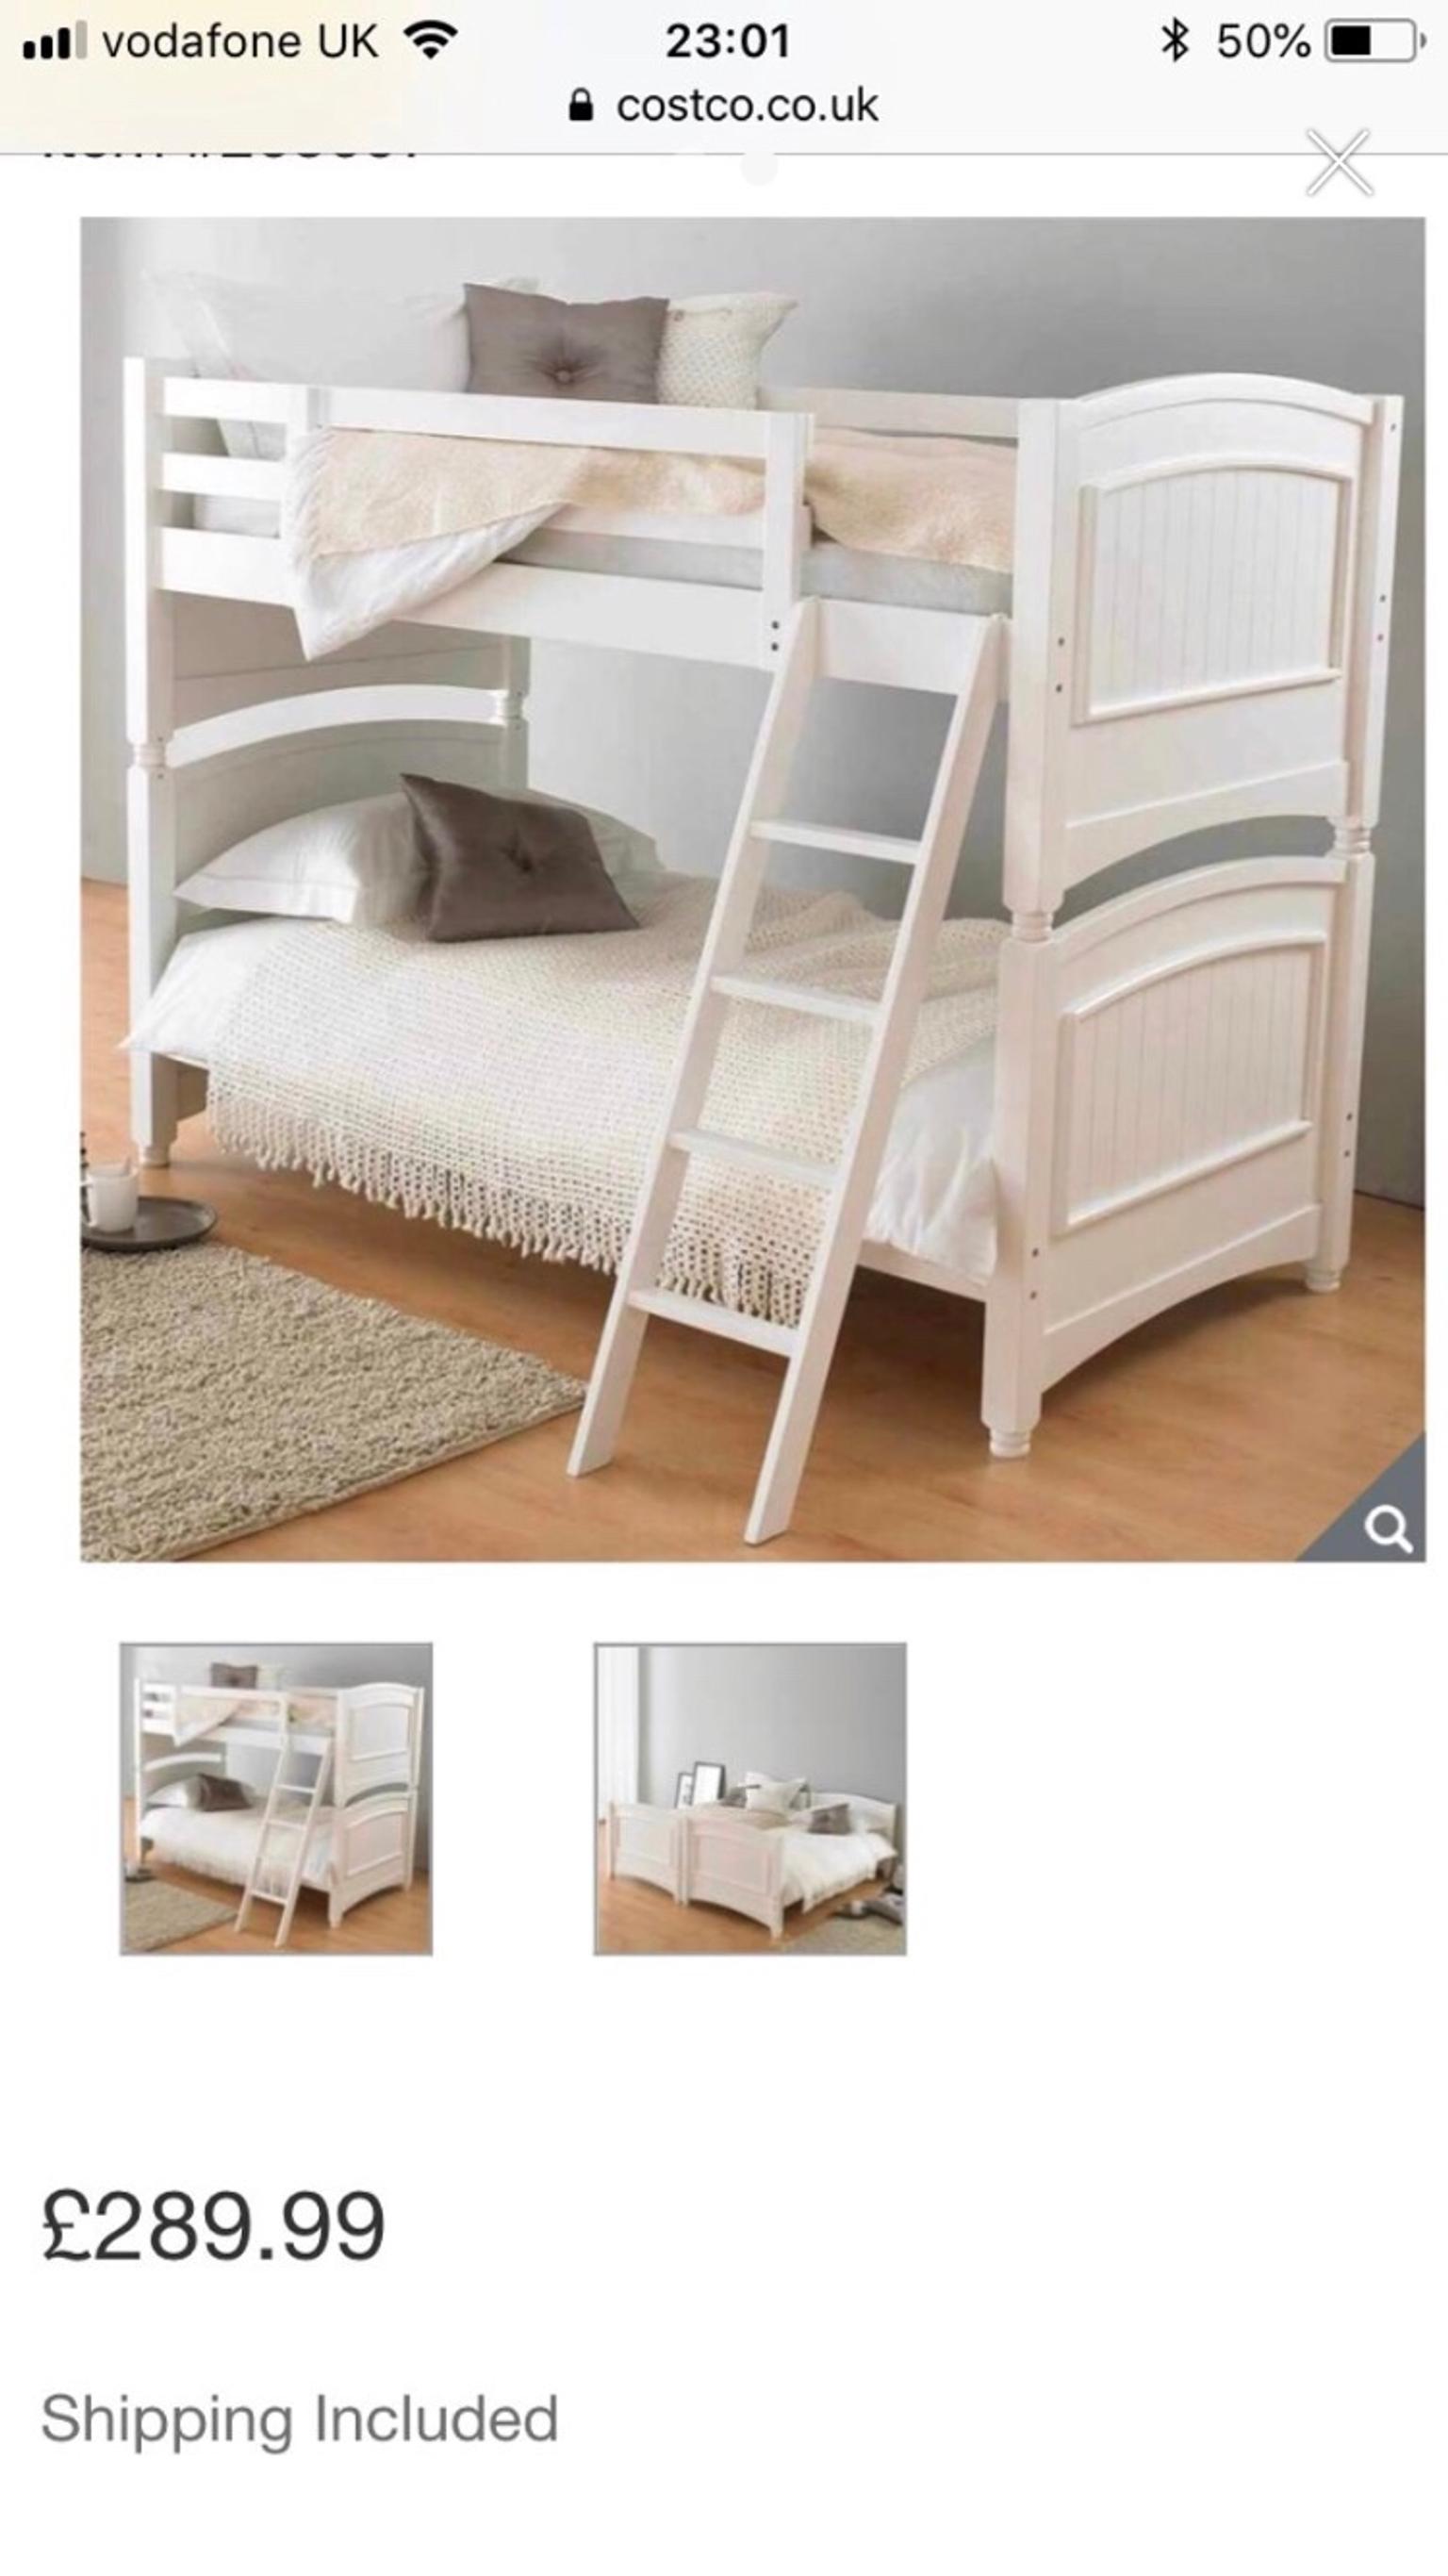 Costco Bunk Beds In Rm17 Orsett For, Costco White Bunk Beds